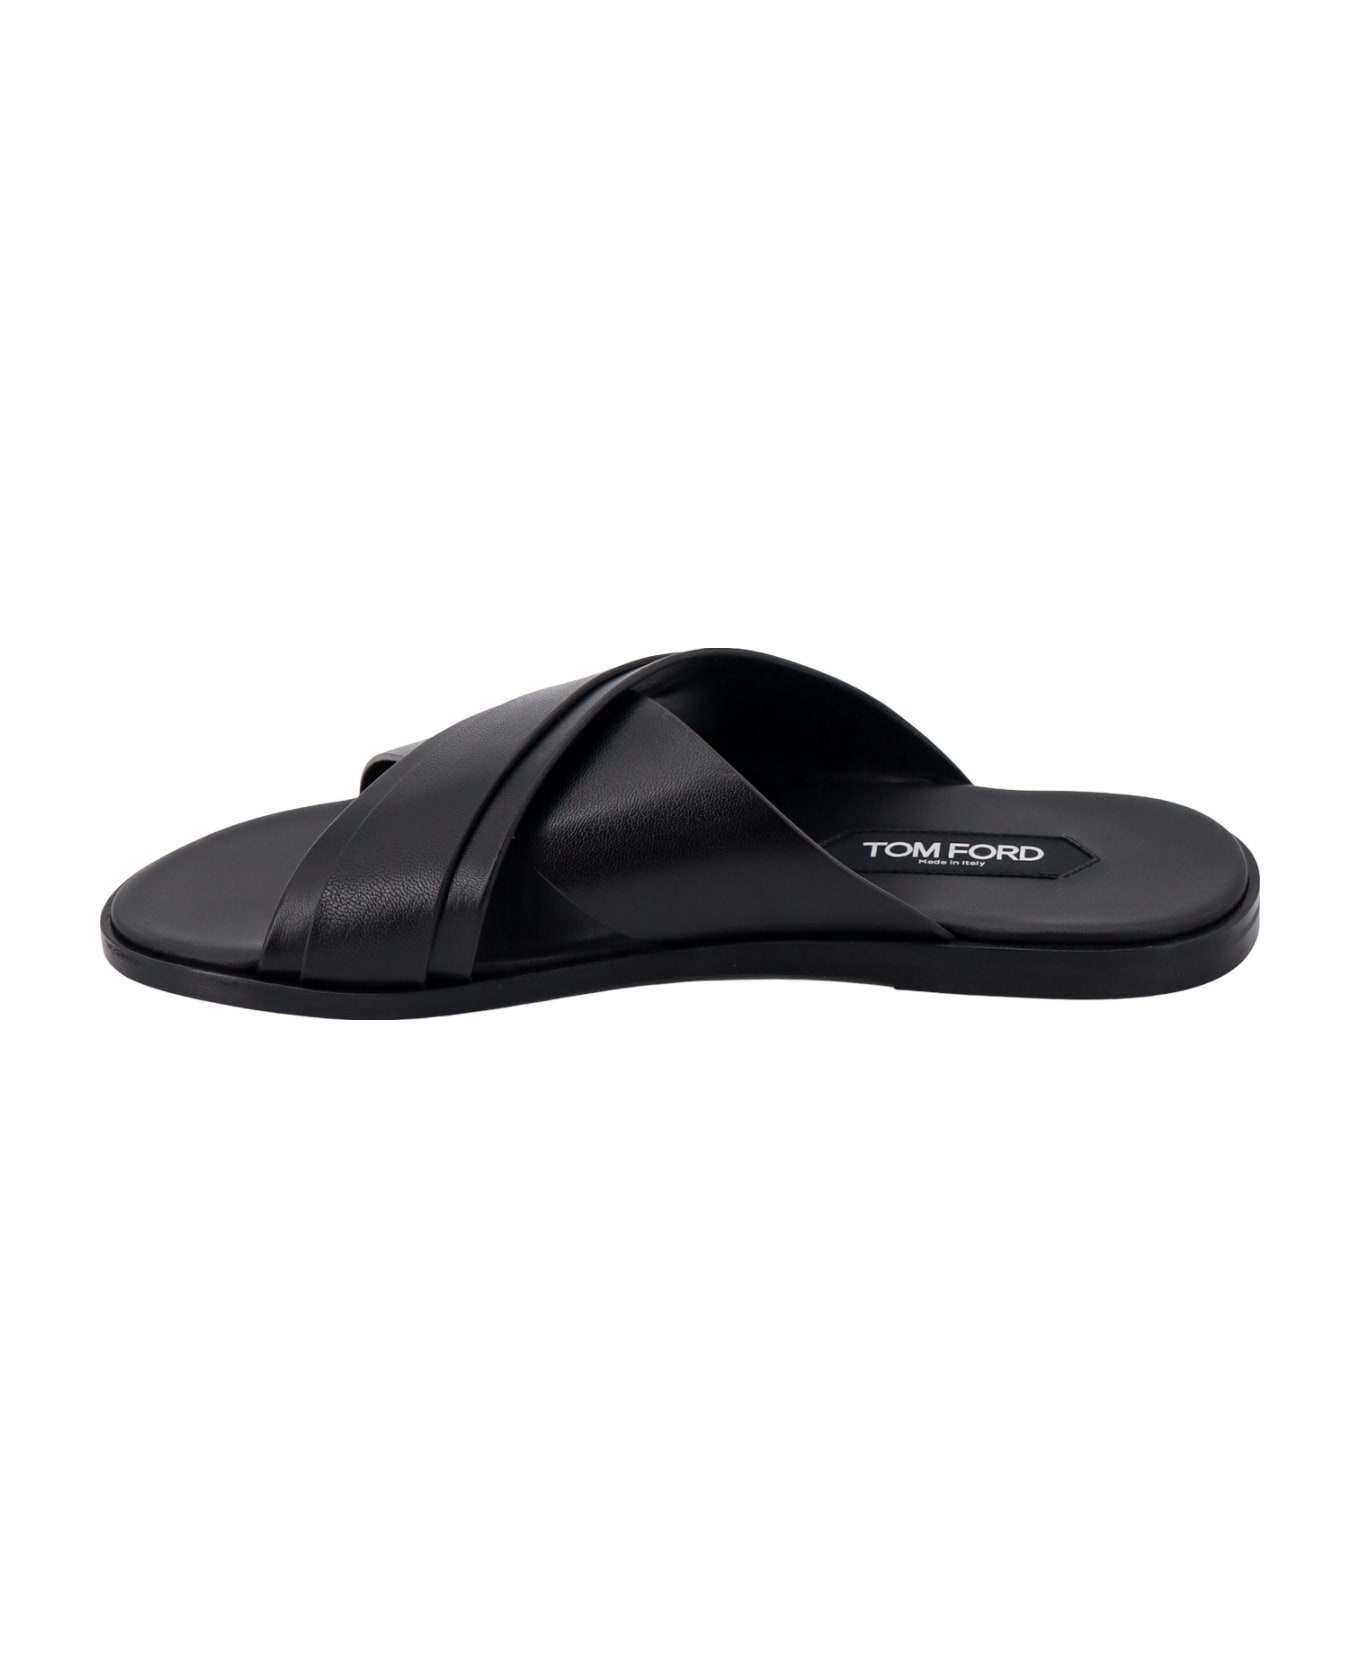 Tom Ford Sandals - Black その他各種シューズ